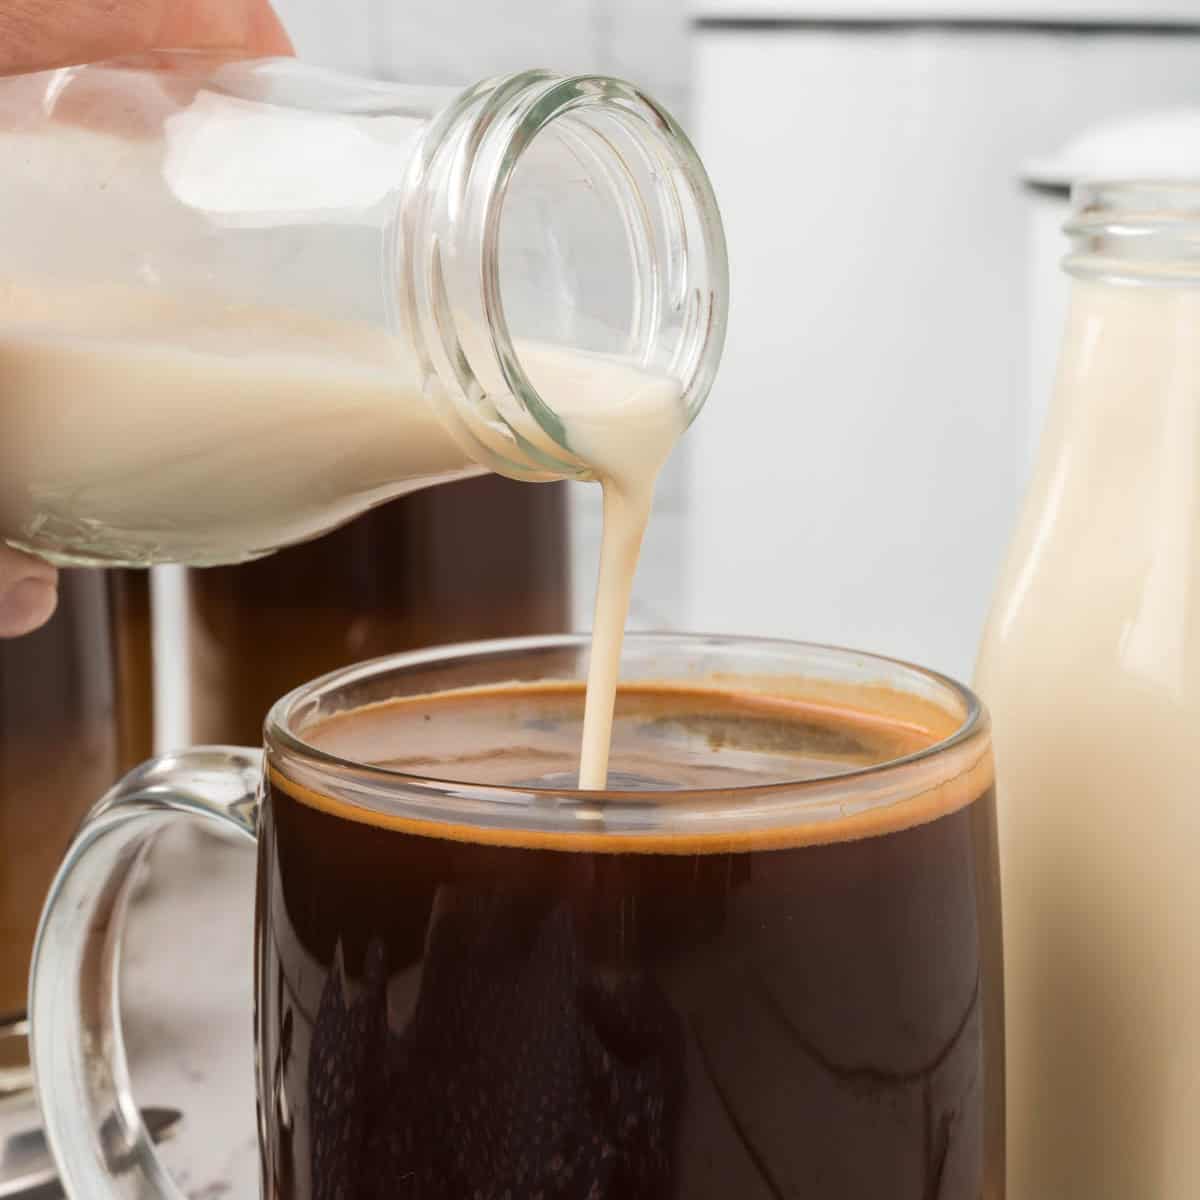 Close-up of a hand pouring milk from a glass bottle into a mug of black coffee. Another bottle of milk is visible in the background. The scene suggests adding homemade coffee creamer to enhance your perfect cup.